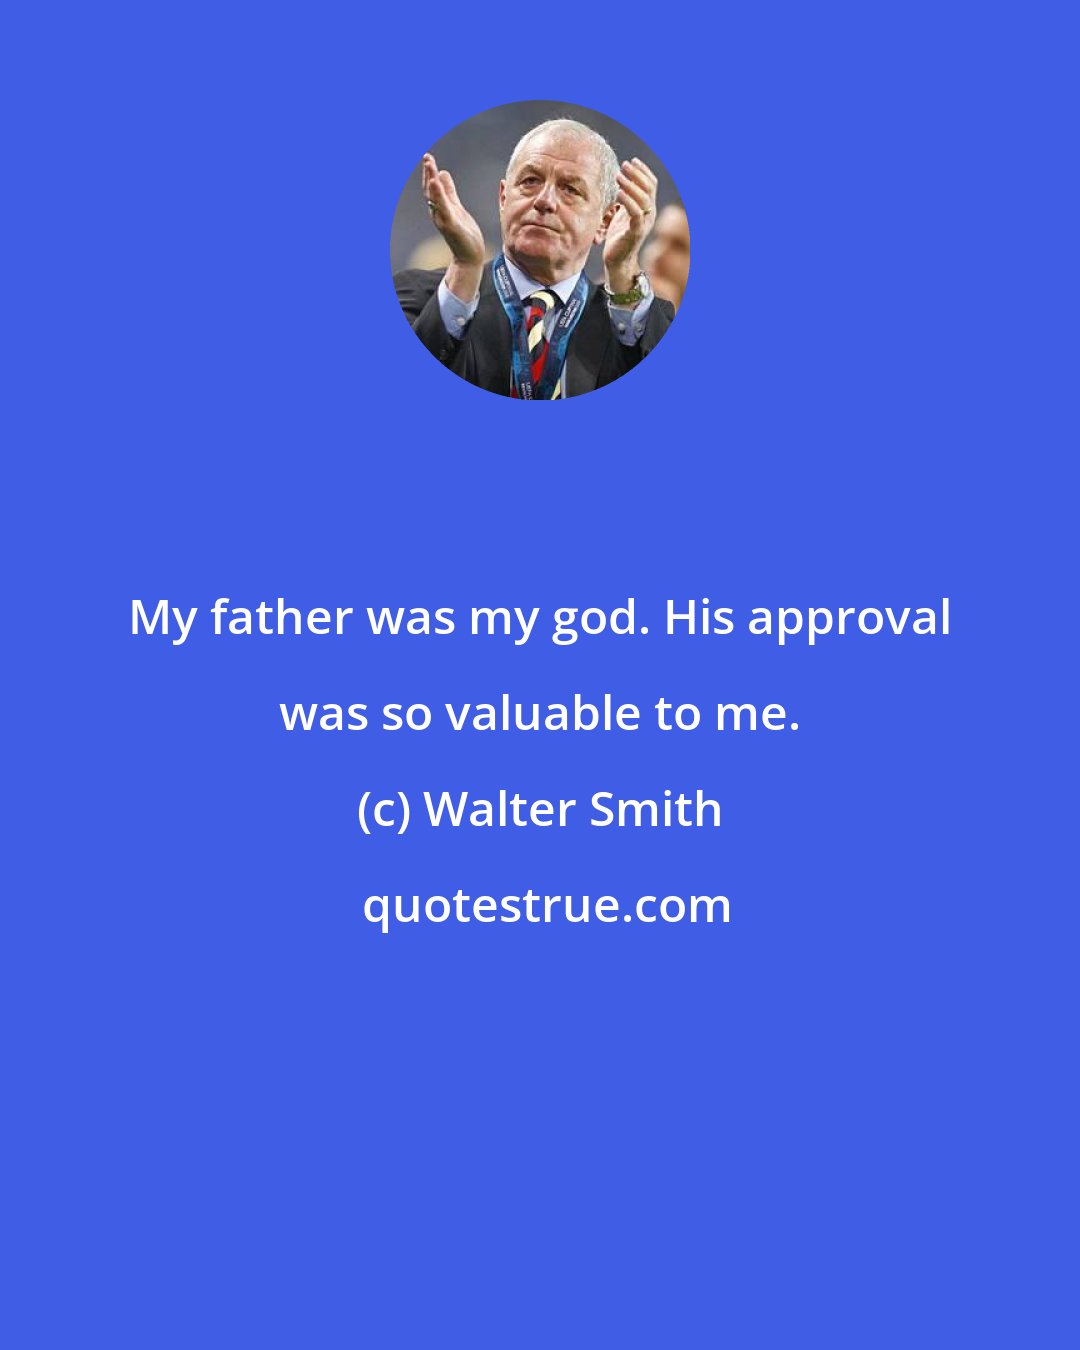 Walter Smith: My father was my god. His approval was so valuable to me.